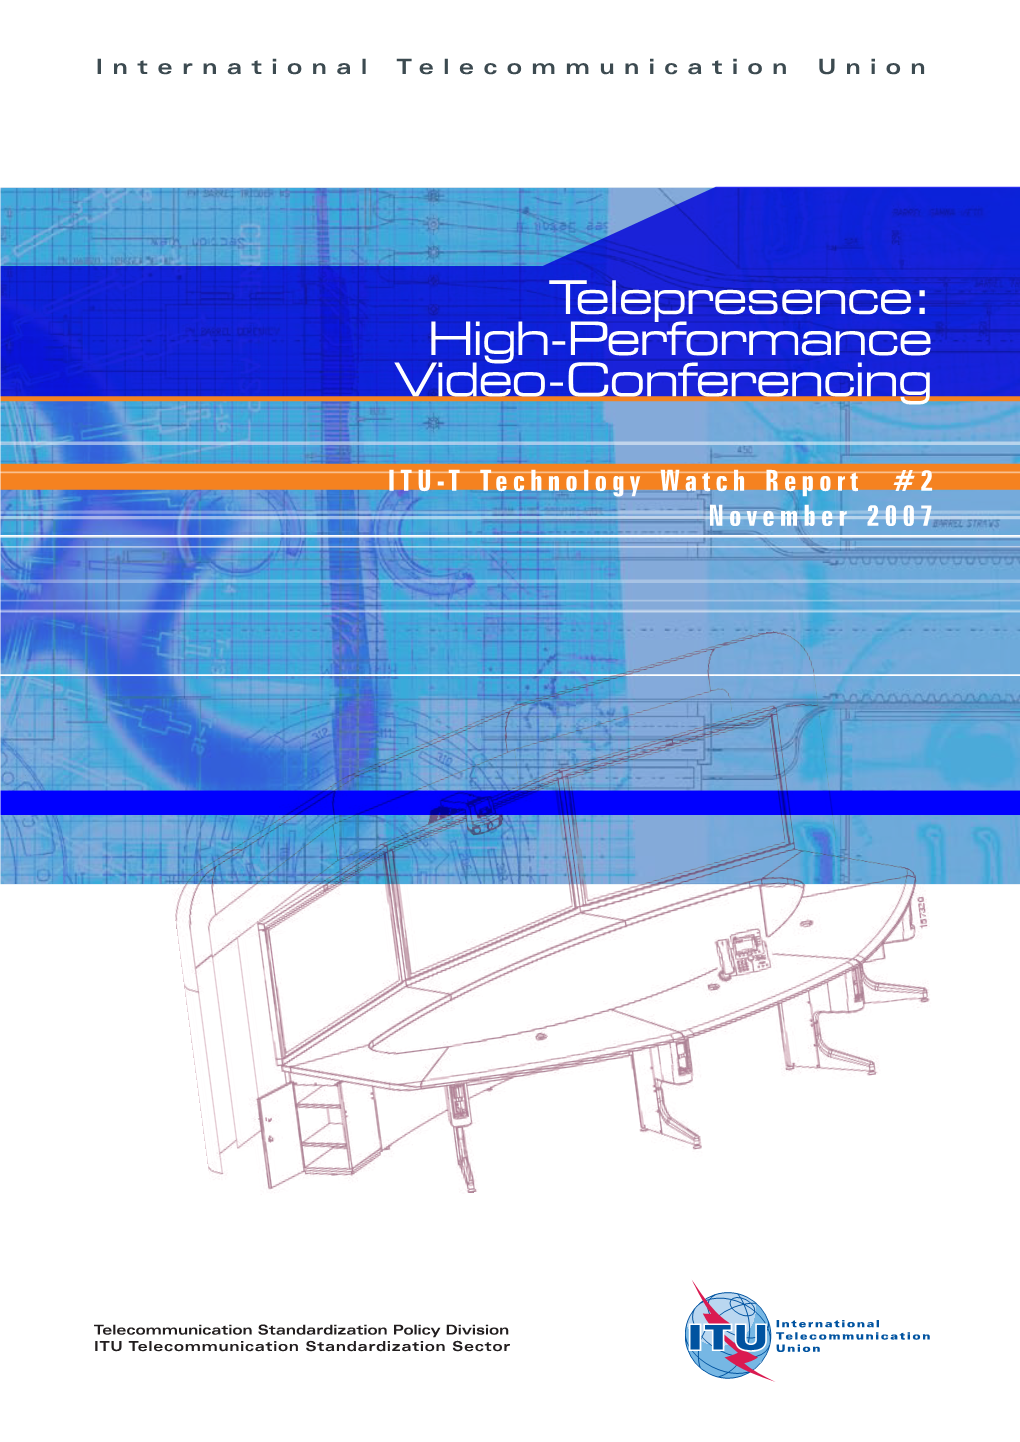 Telepresence: High-Performance Video-Conferencing ITU-T Technology Watch Report #2 November 2007